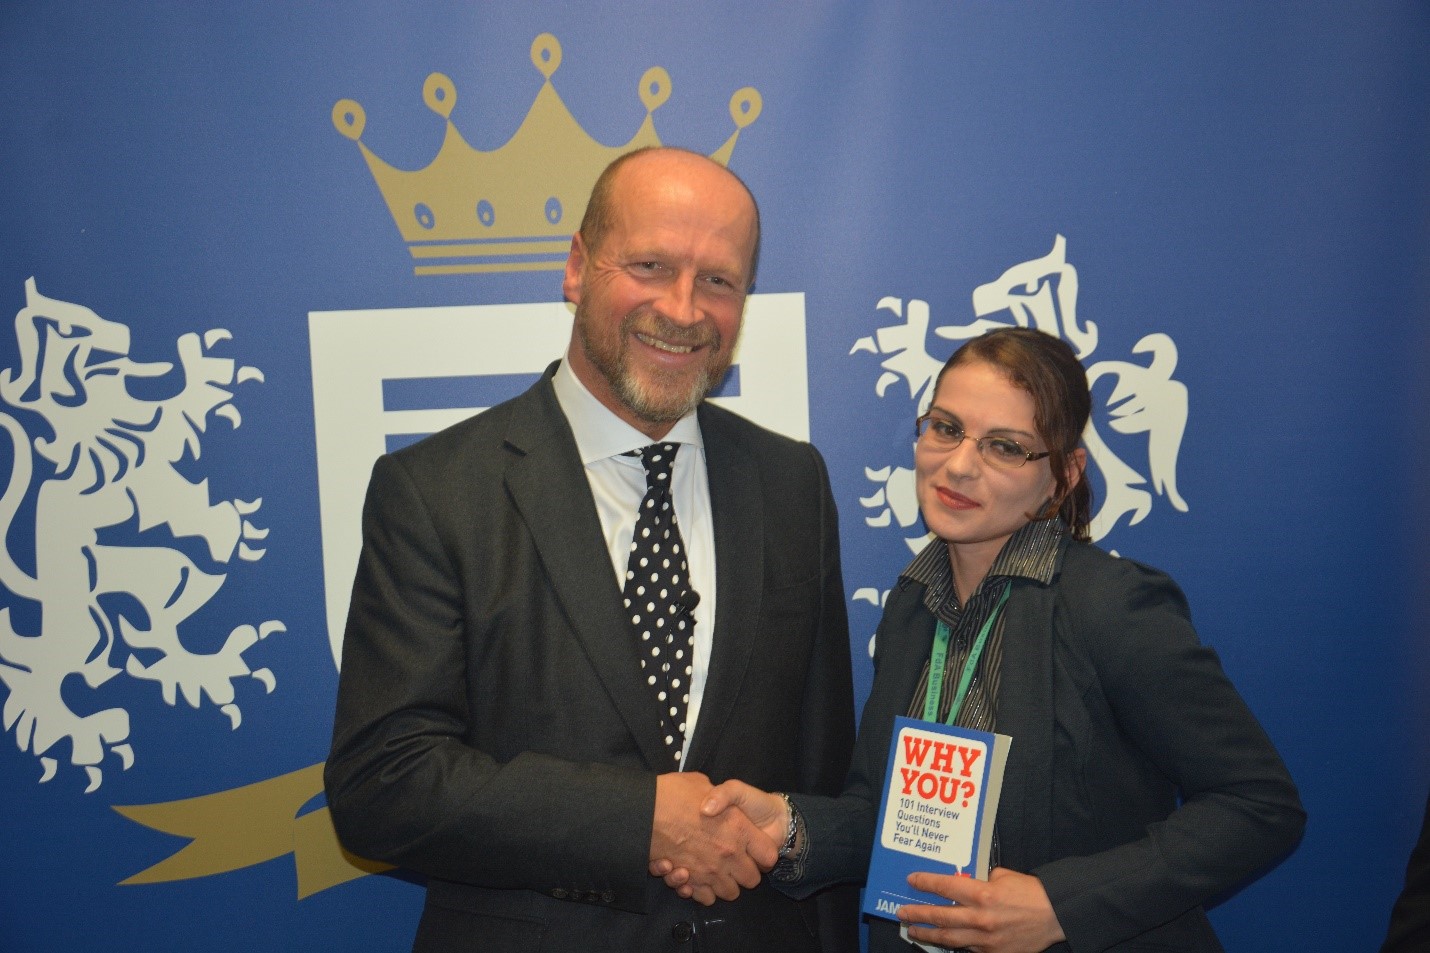 Business student, Cristina Badea, who also serves as The Mayor of Croydon’s Romanian Culture Ambassador, tells James that his presentation was one of the most inspiring moments of her life